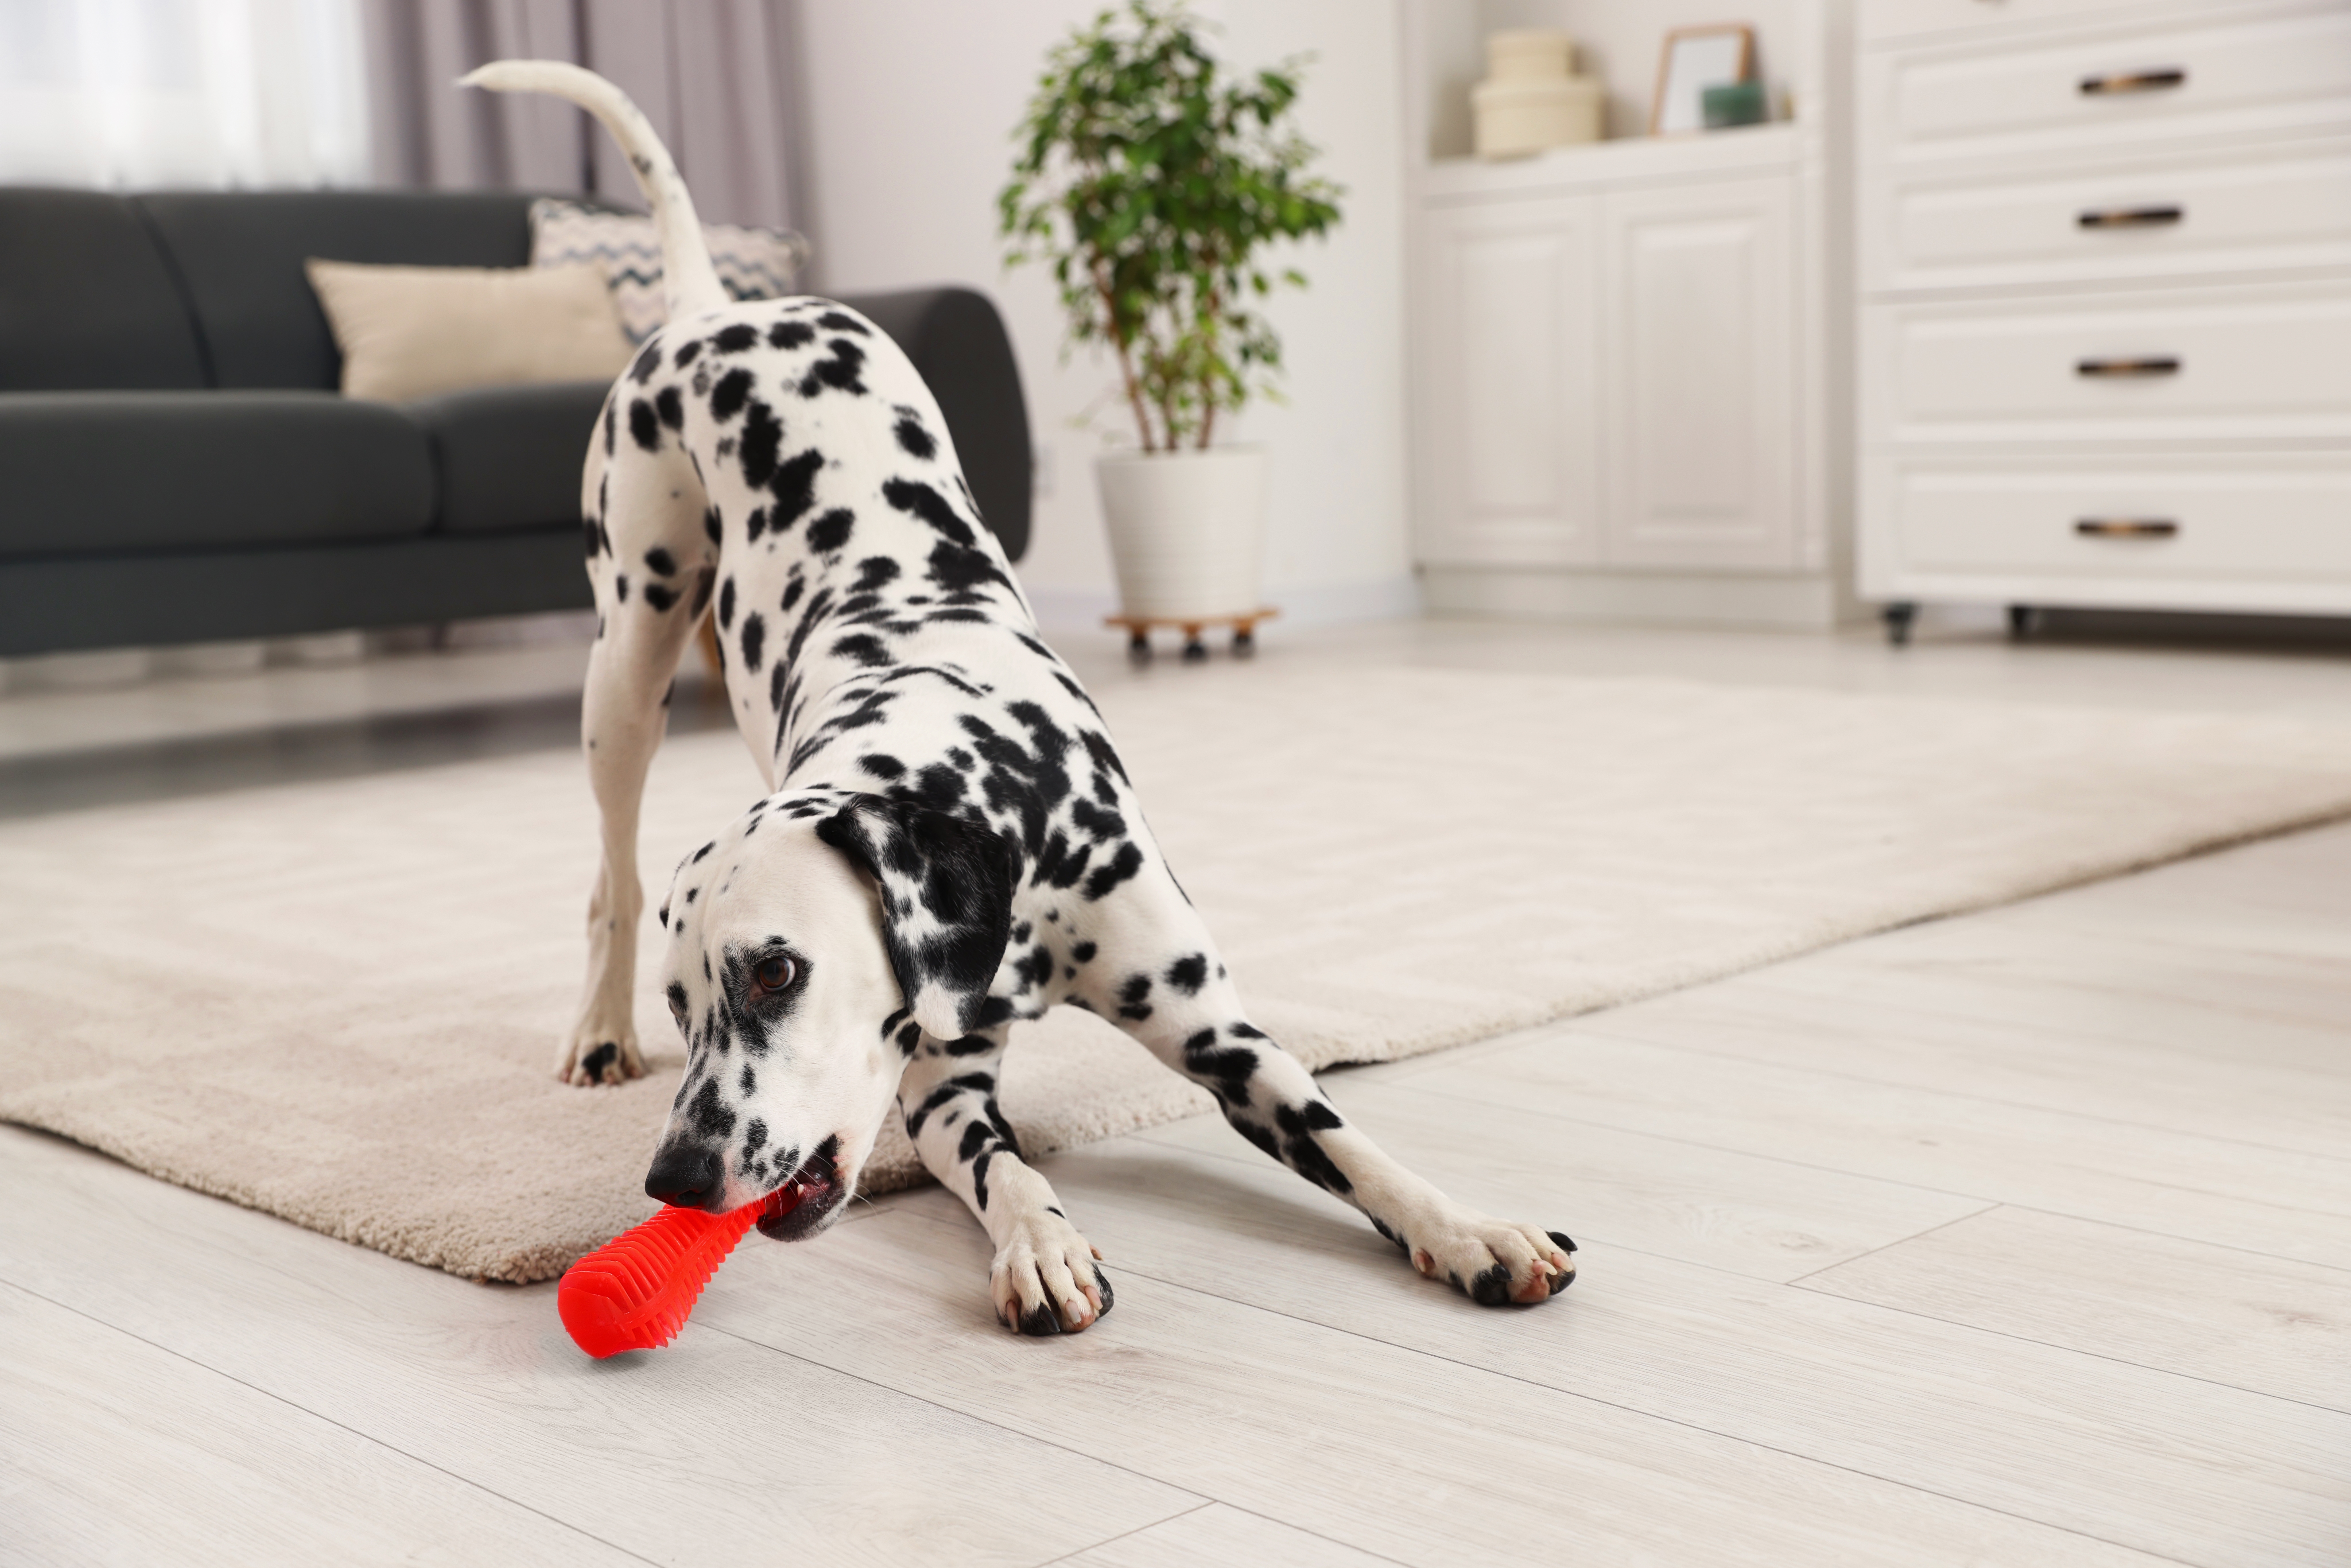 Spotty black and white dog playing with chew toy